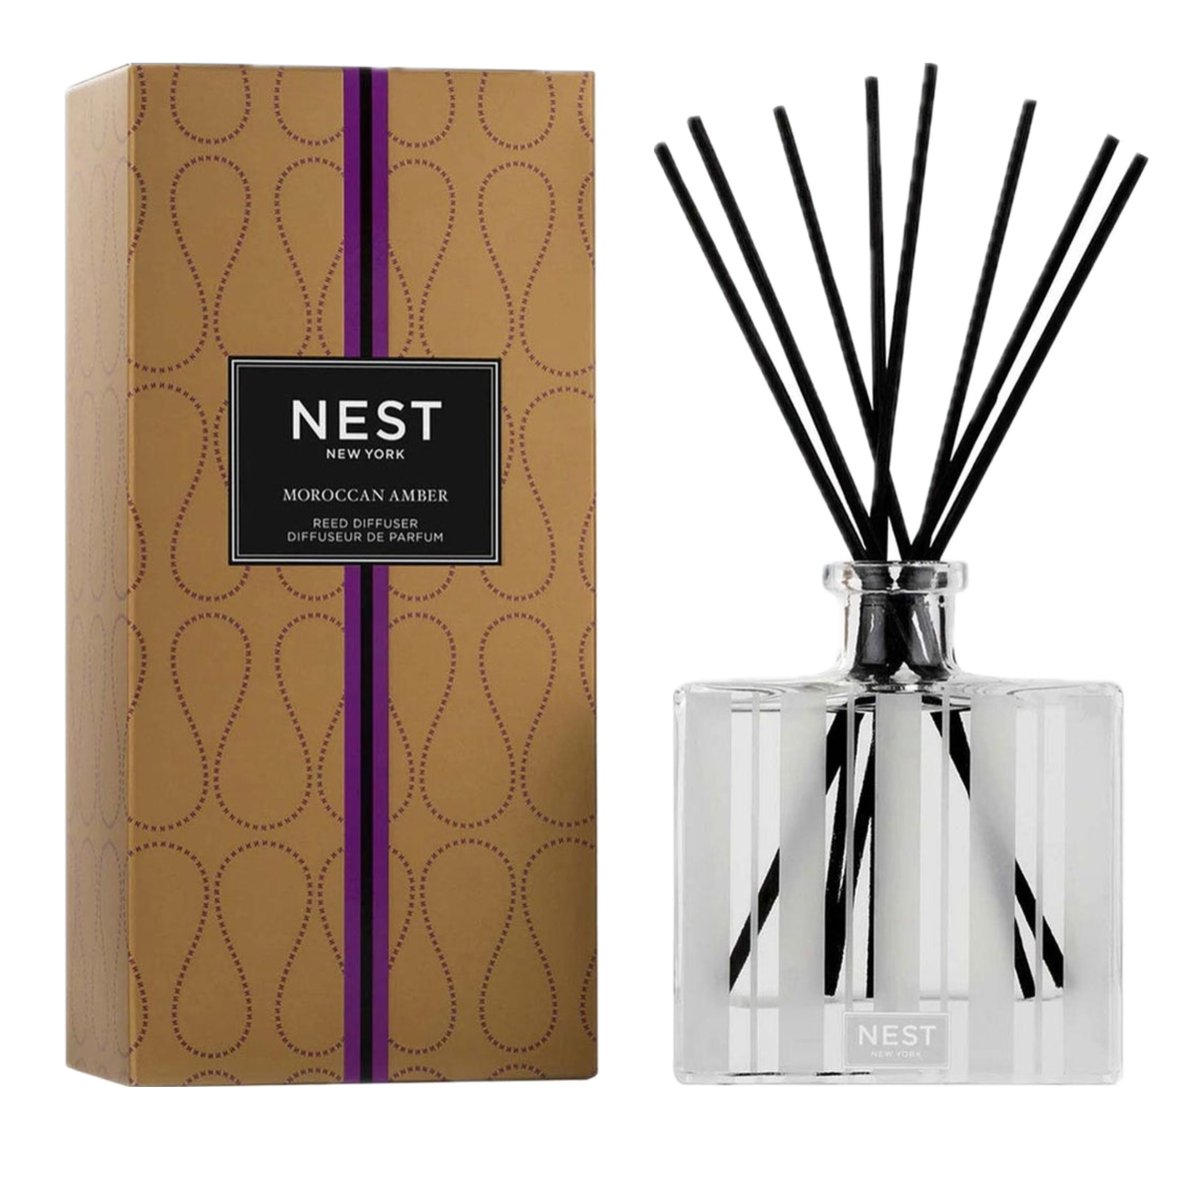 Silo of Nest New York’s Moroccan Amber Reed Diffuser